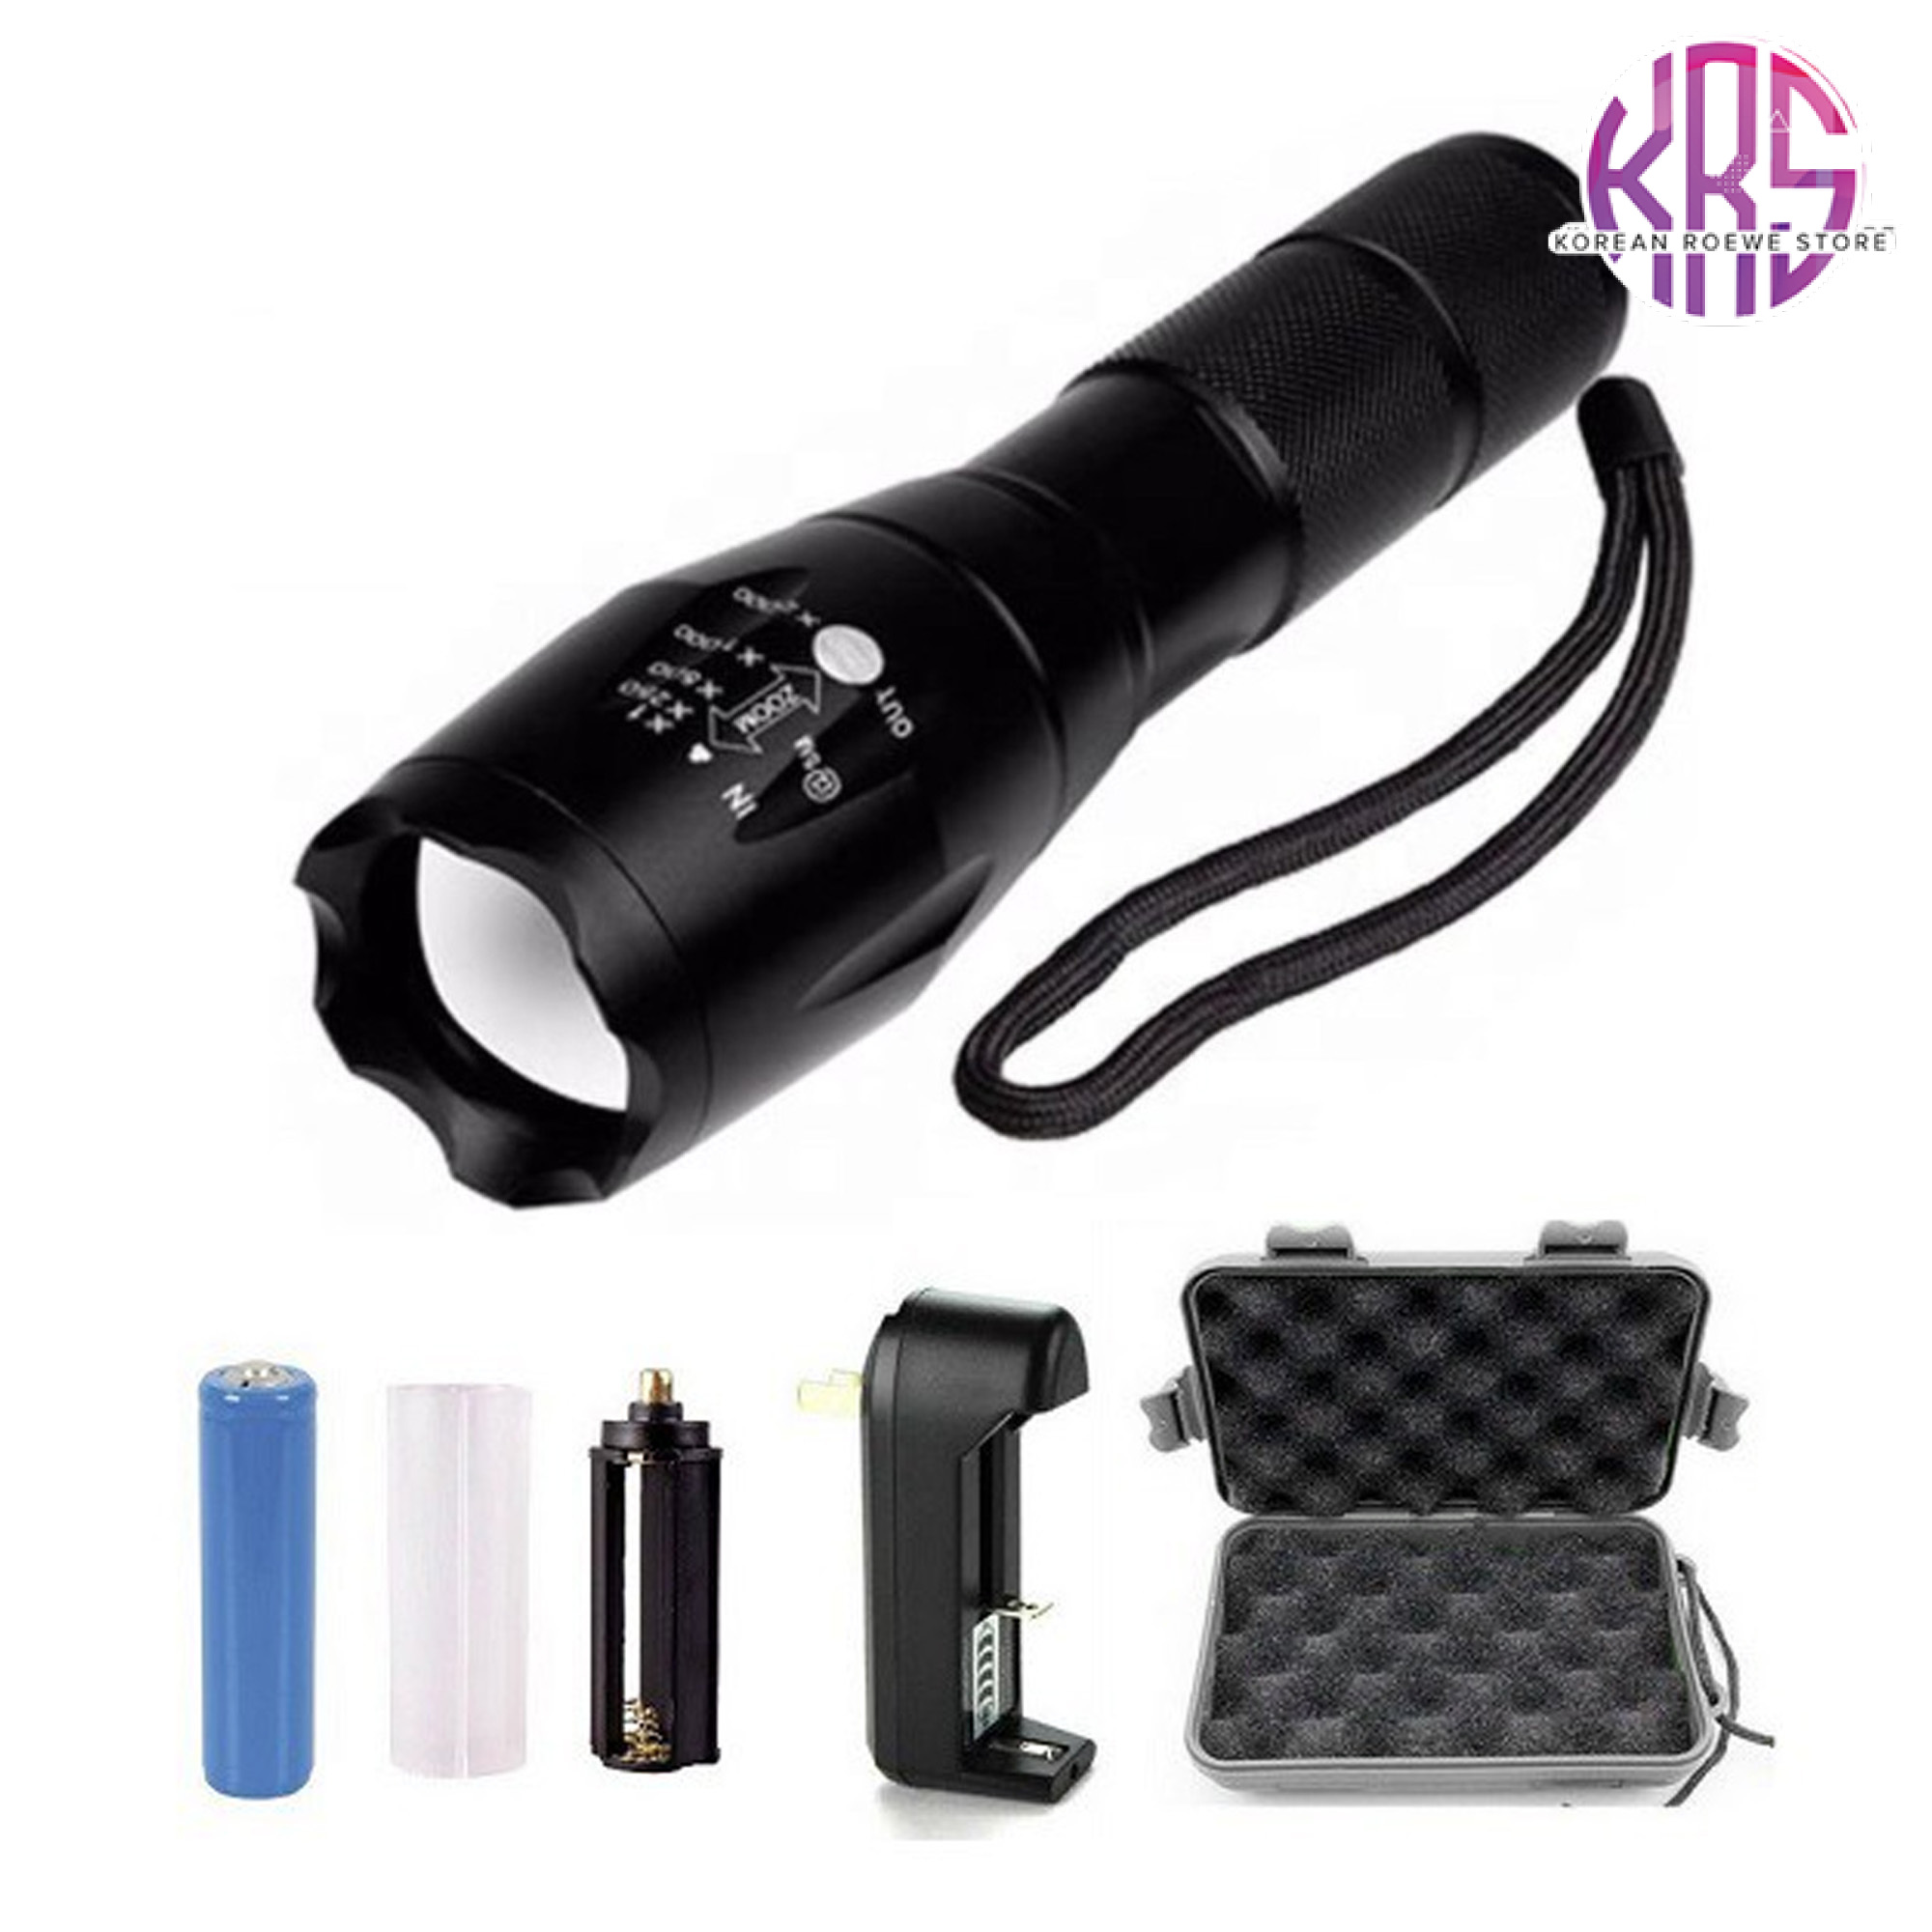 Buy Flashlight Rechargeable Torch online